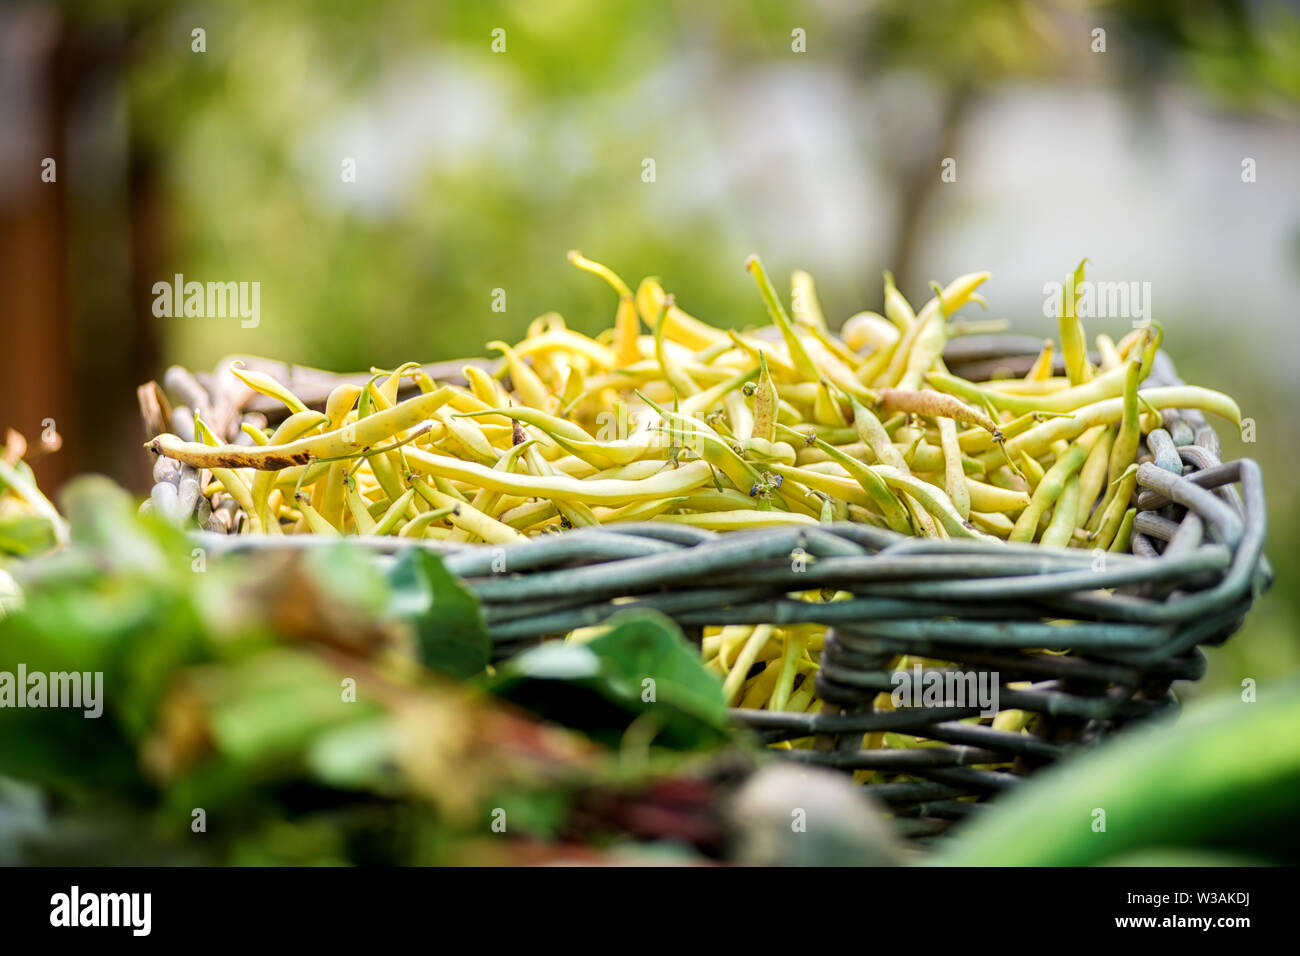 Rustic basket of freshly harvested yellow beans outdoors in the veggie garden or farm viewed over foreground greenery close up Stock Photo